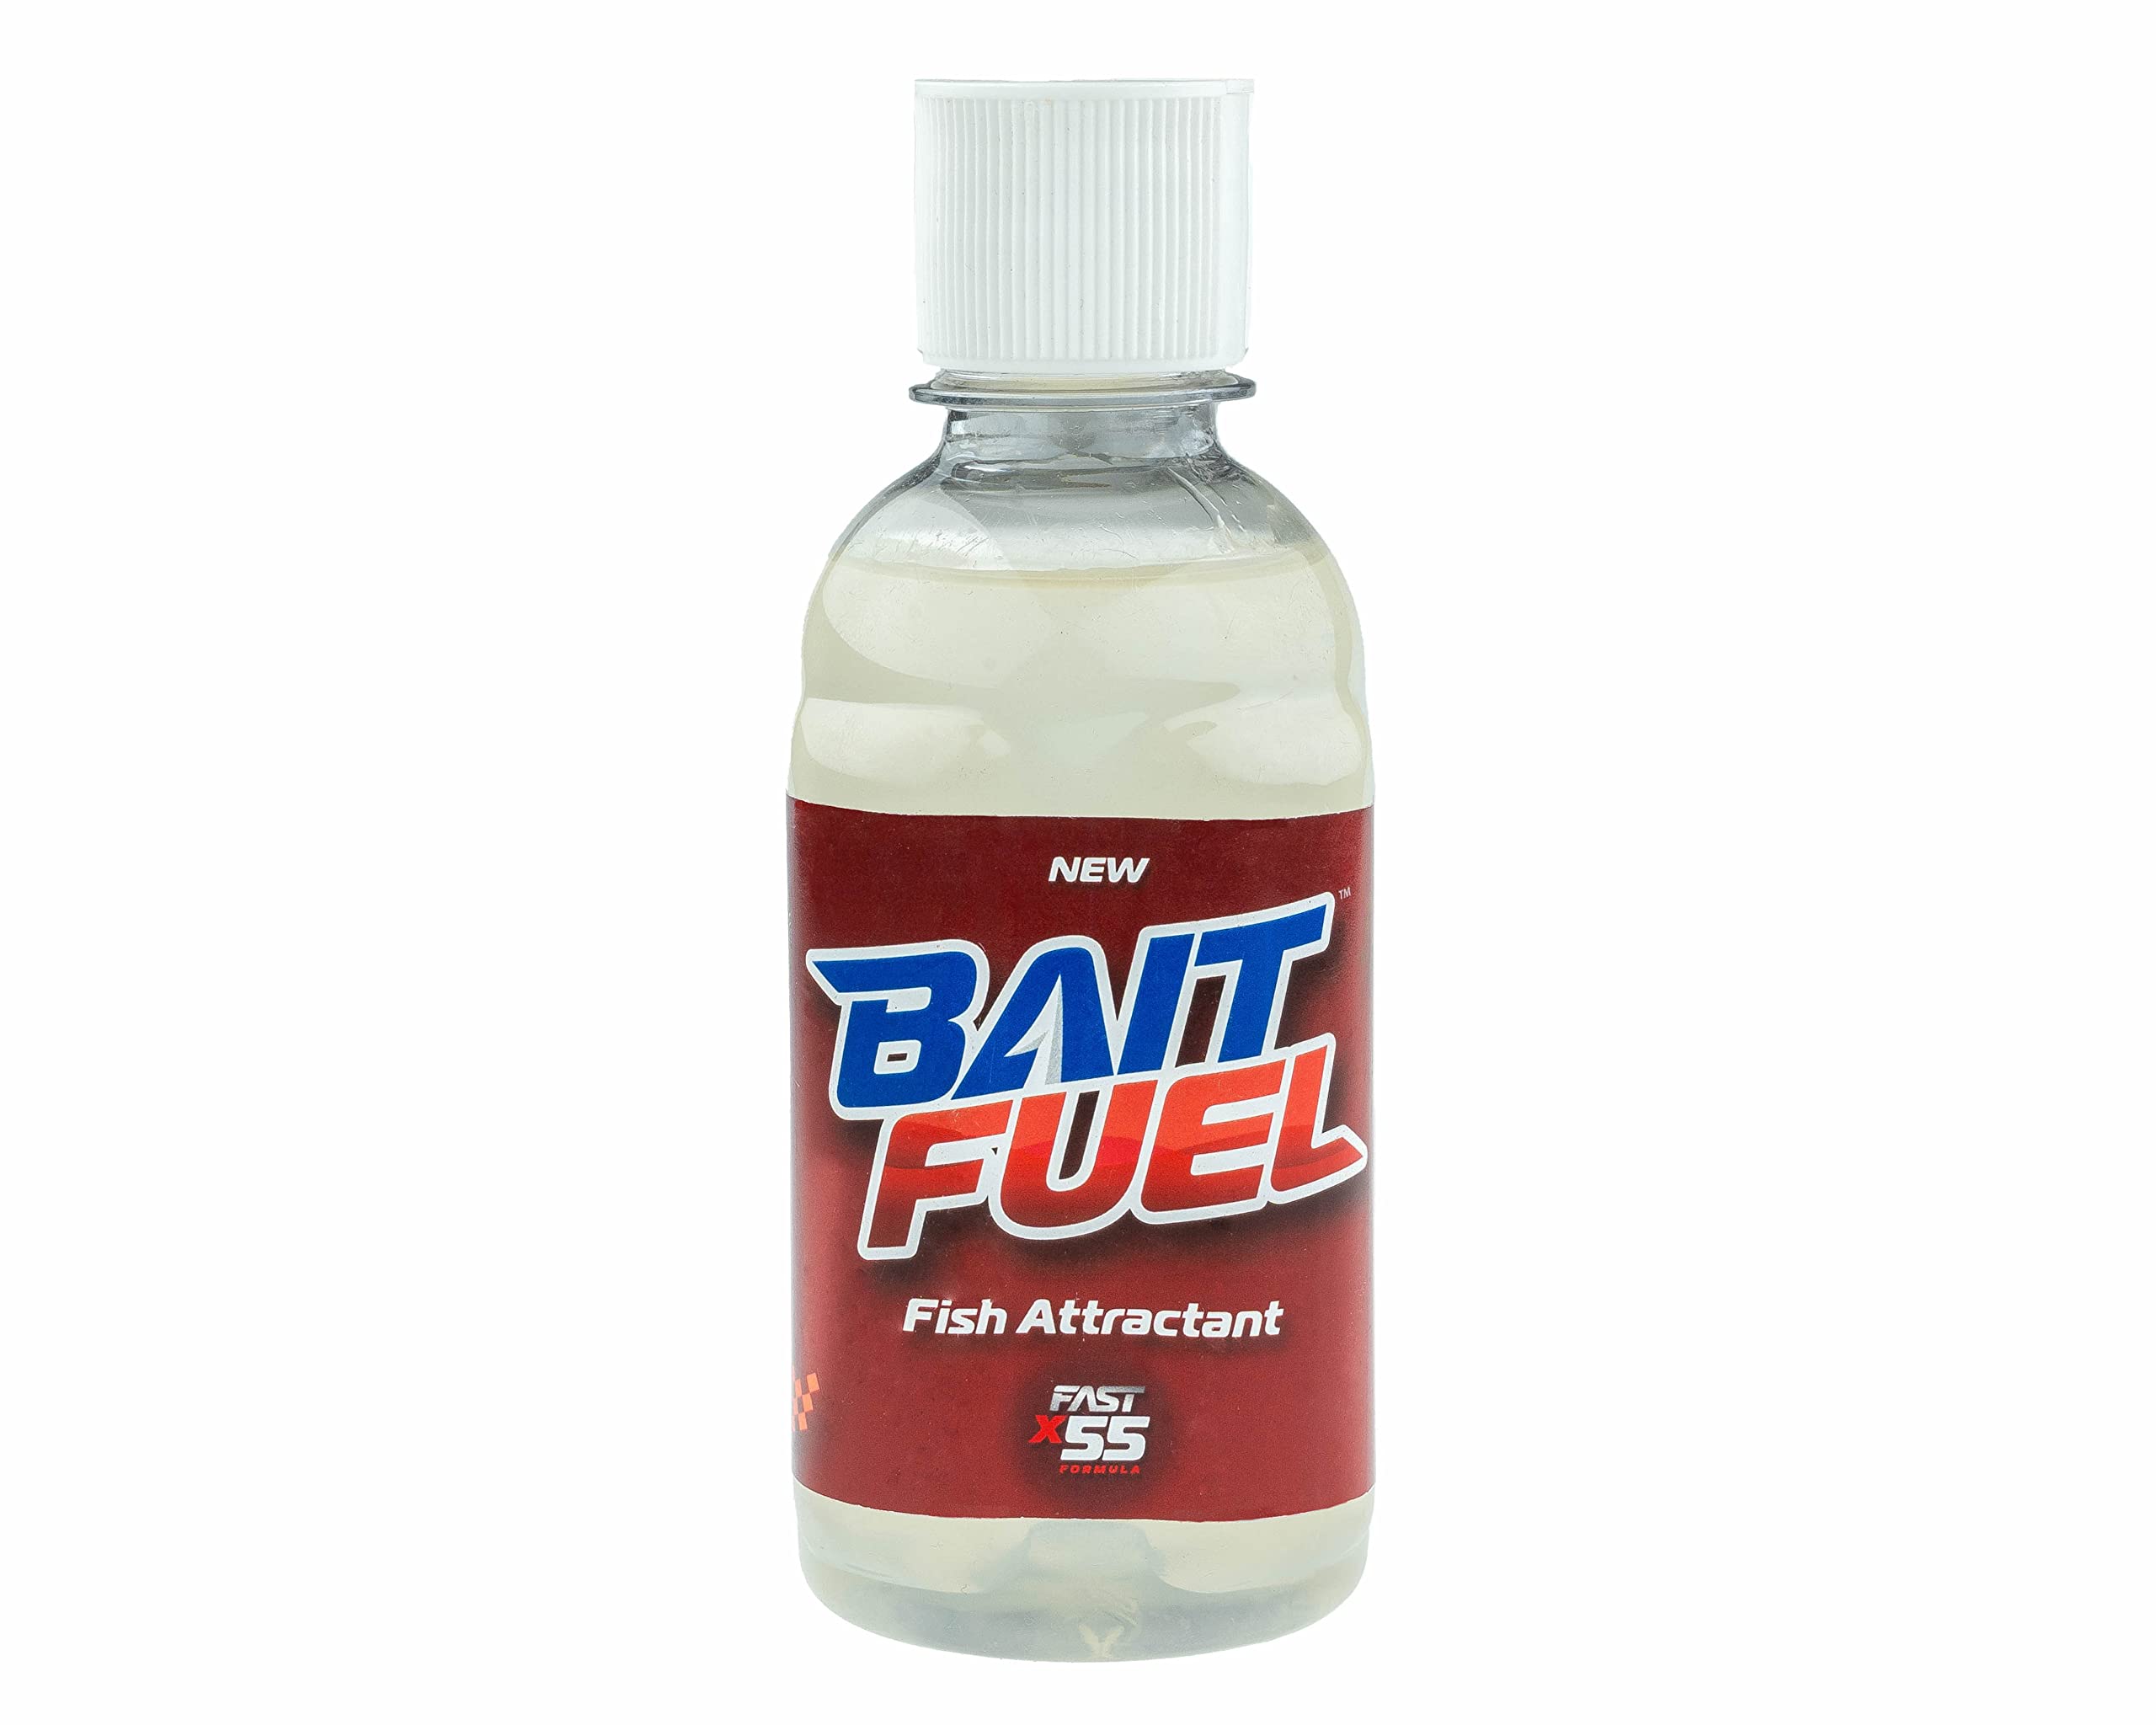 BAITFUEL X55 Formula Gel for Fishing: The Supercharged Fish Scent